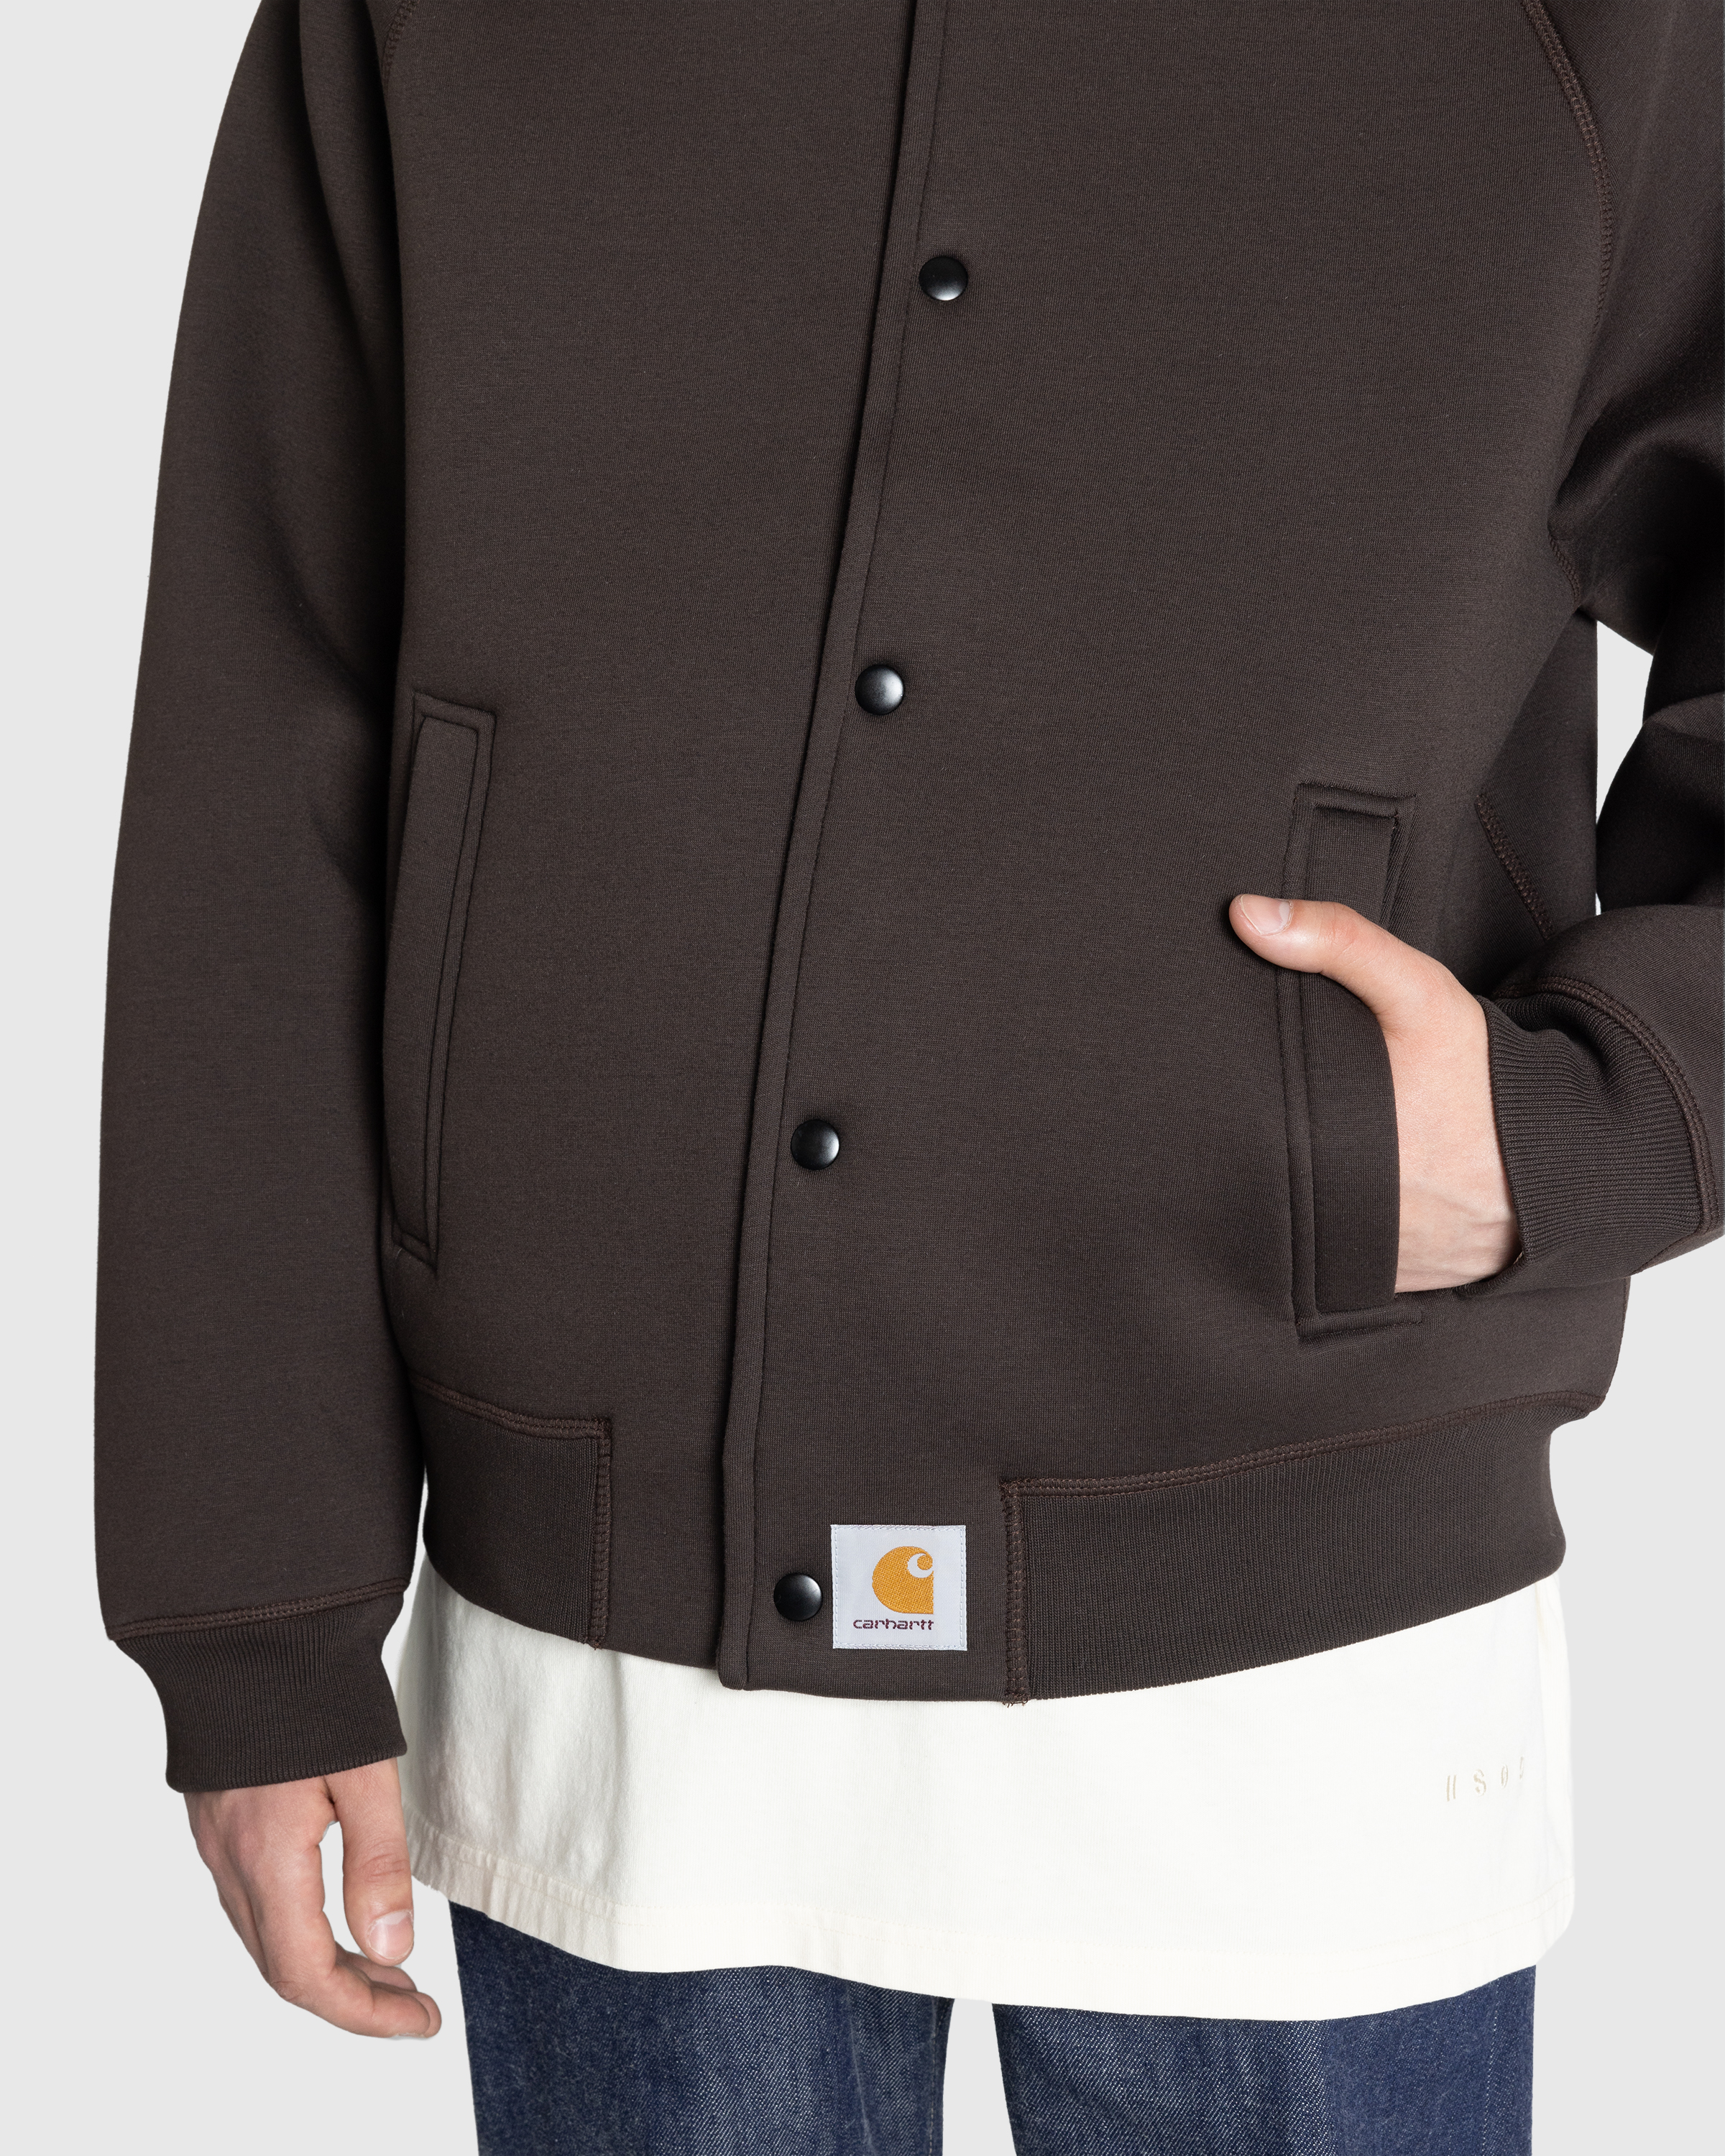 Carhartt WIP – Car-Lux Bomber Tobacco/Grey - Outerwear - Brown - Image 5